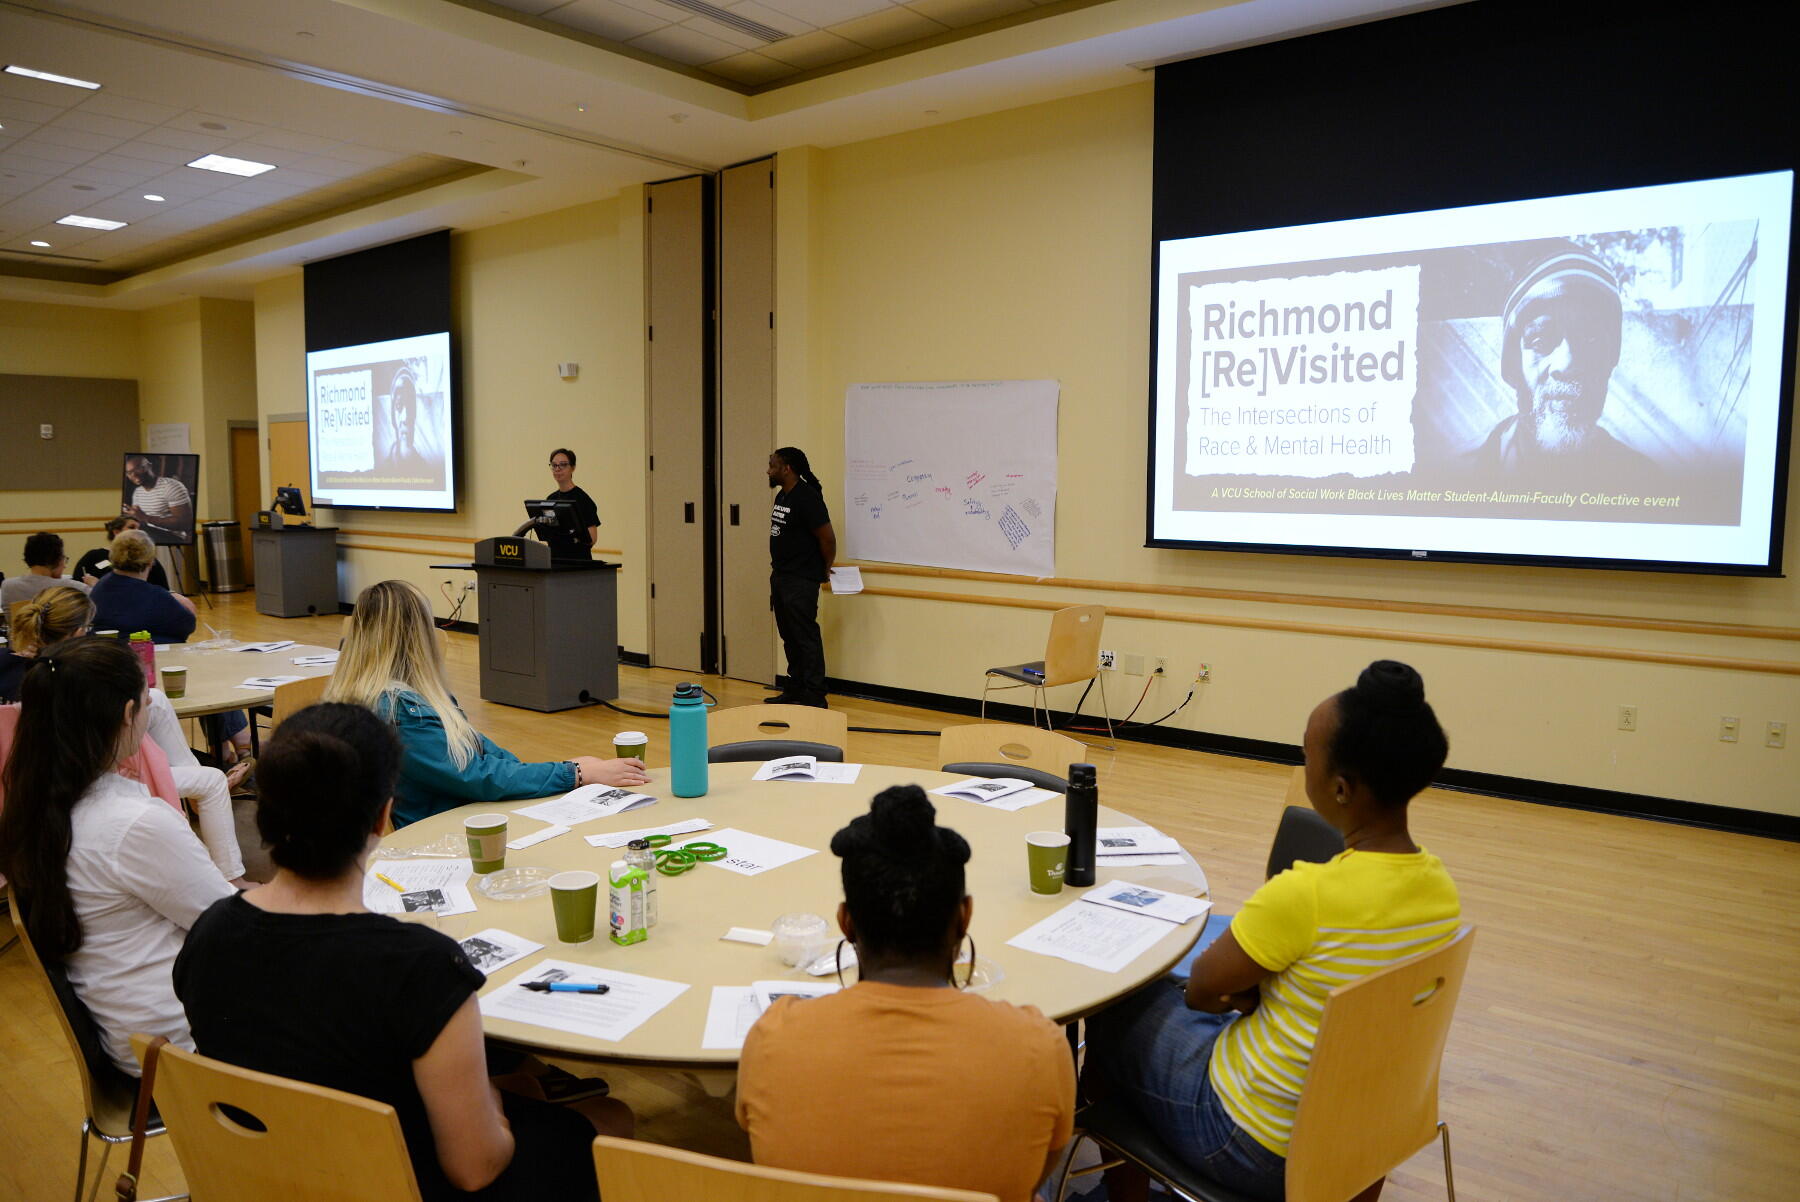 M. Alex Wagaman, Ph.D., assistant professor in the School of Social Work, and Daryl V. Fraser, associate professor in teaching in the School of Social Work, introduce the students to Richmond [Re]Visited 2018: The Intersections of Race & Mental Health.